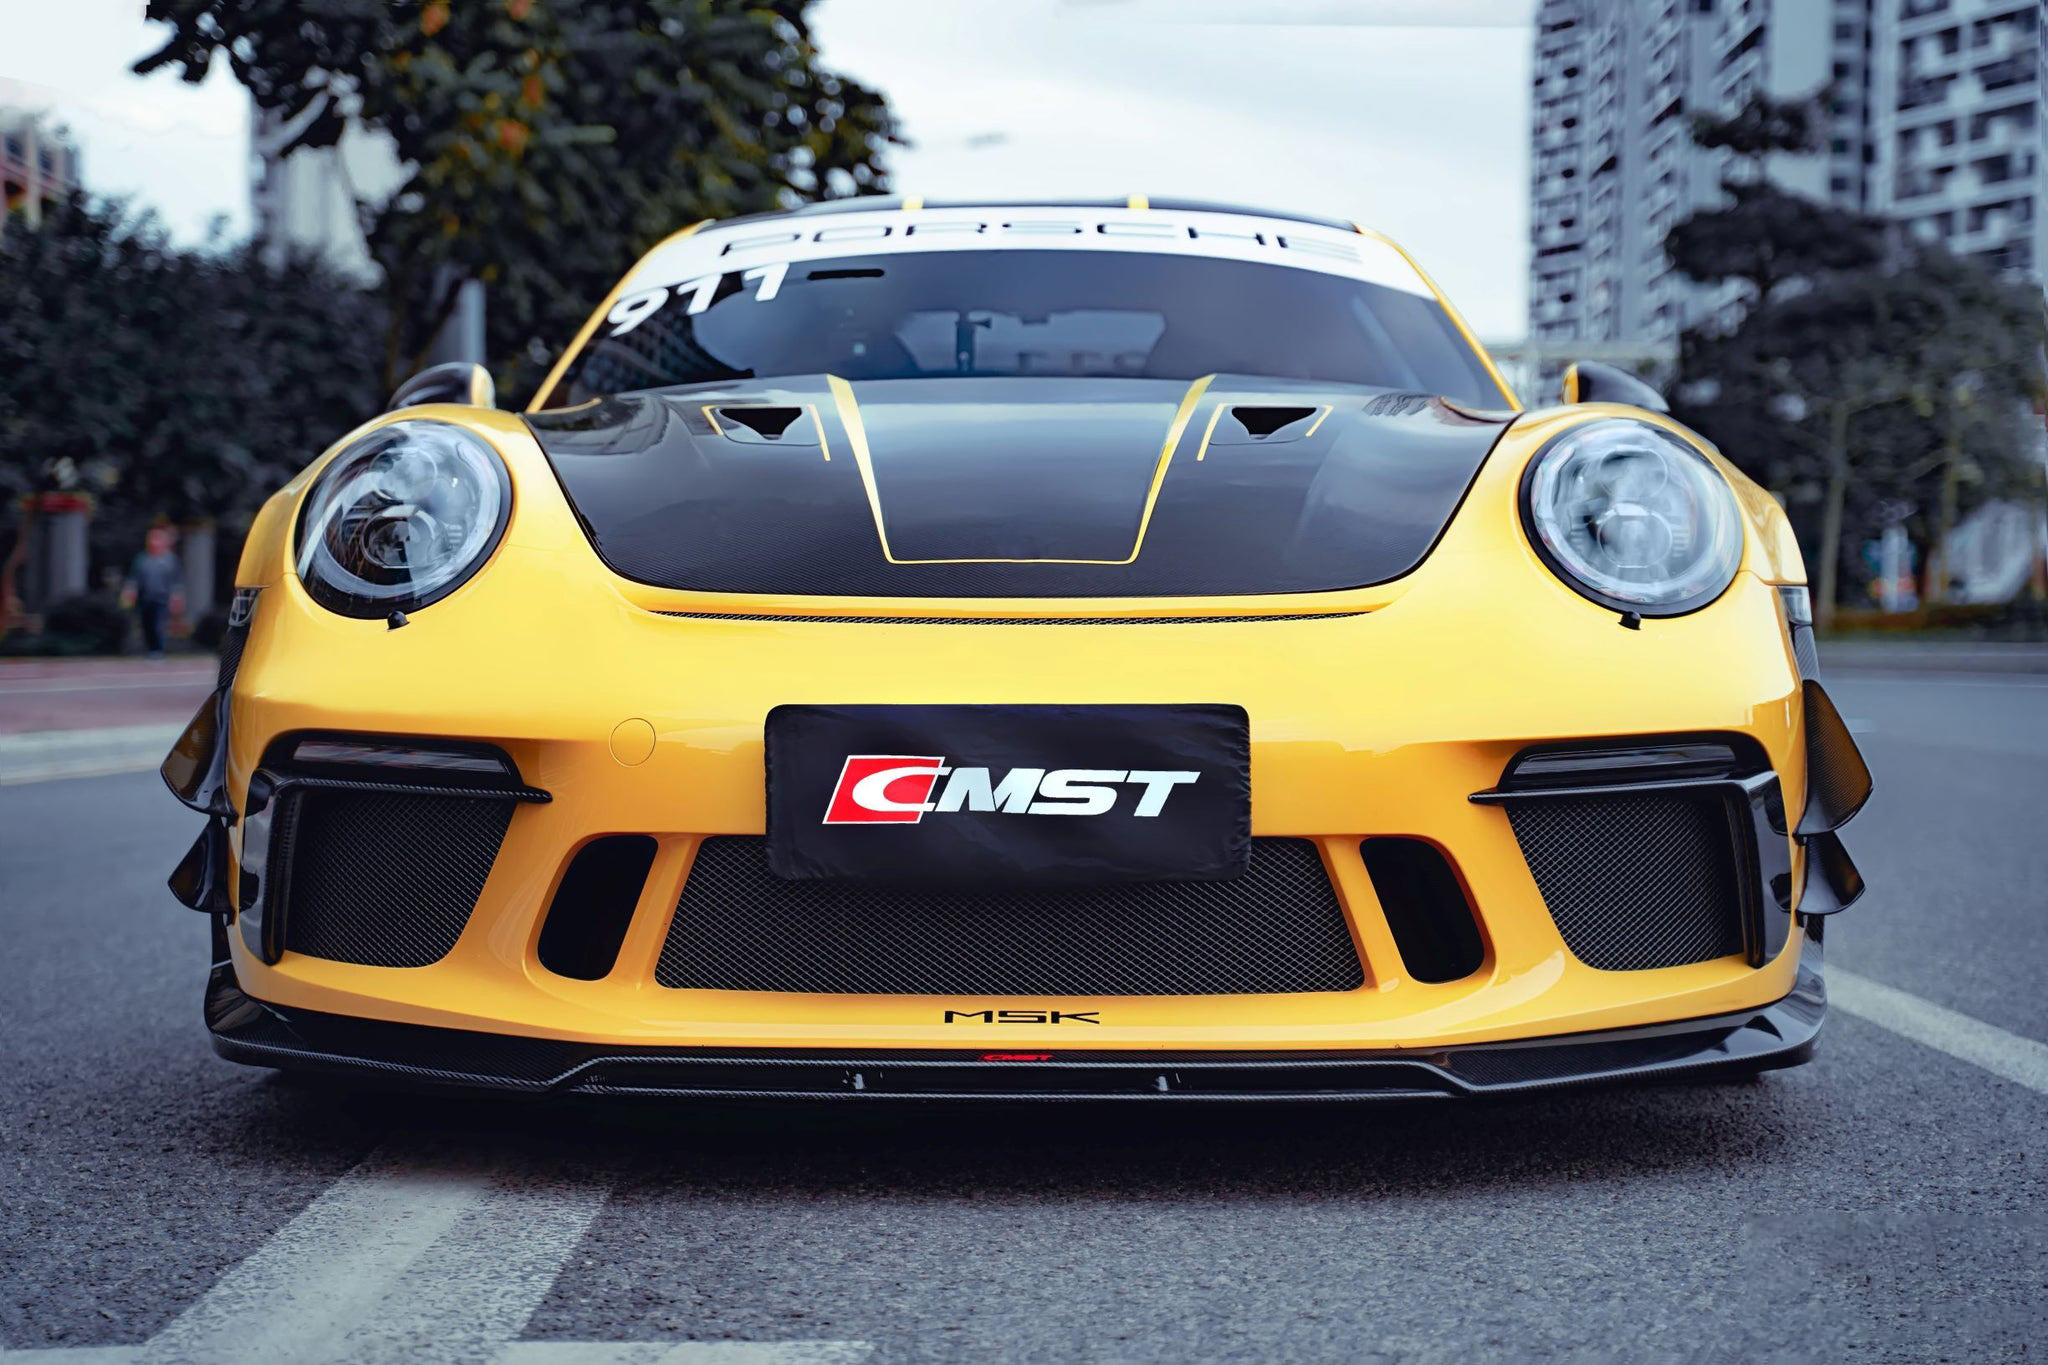 Check our price and buy CMST Carbon Fiber Body Kit set for Porsche 911 991.2 GT3 RS